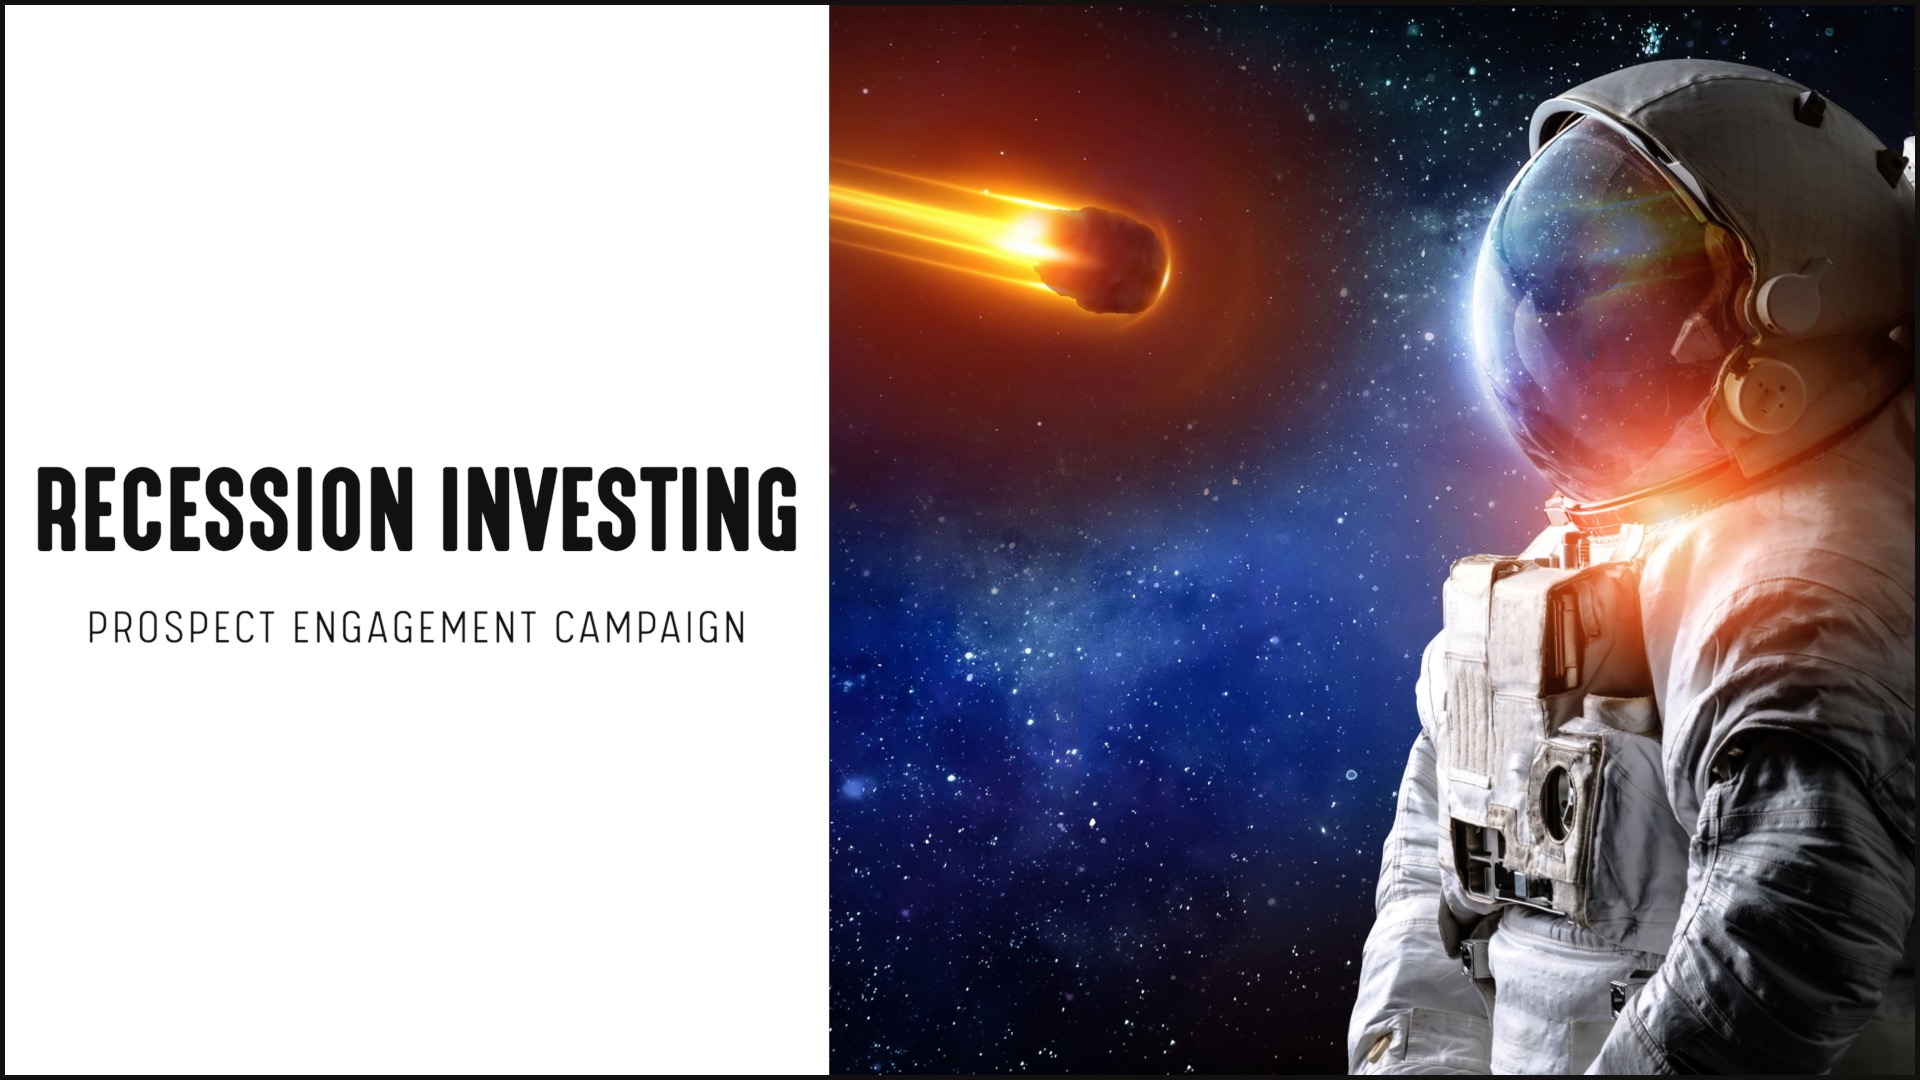 [NEW] Recession Investing Prospect Engagement Campaign